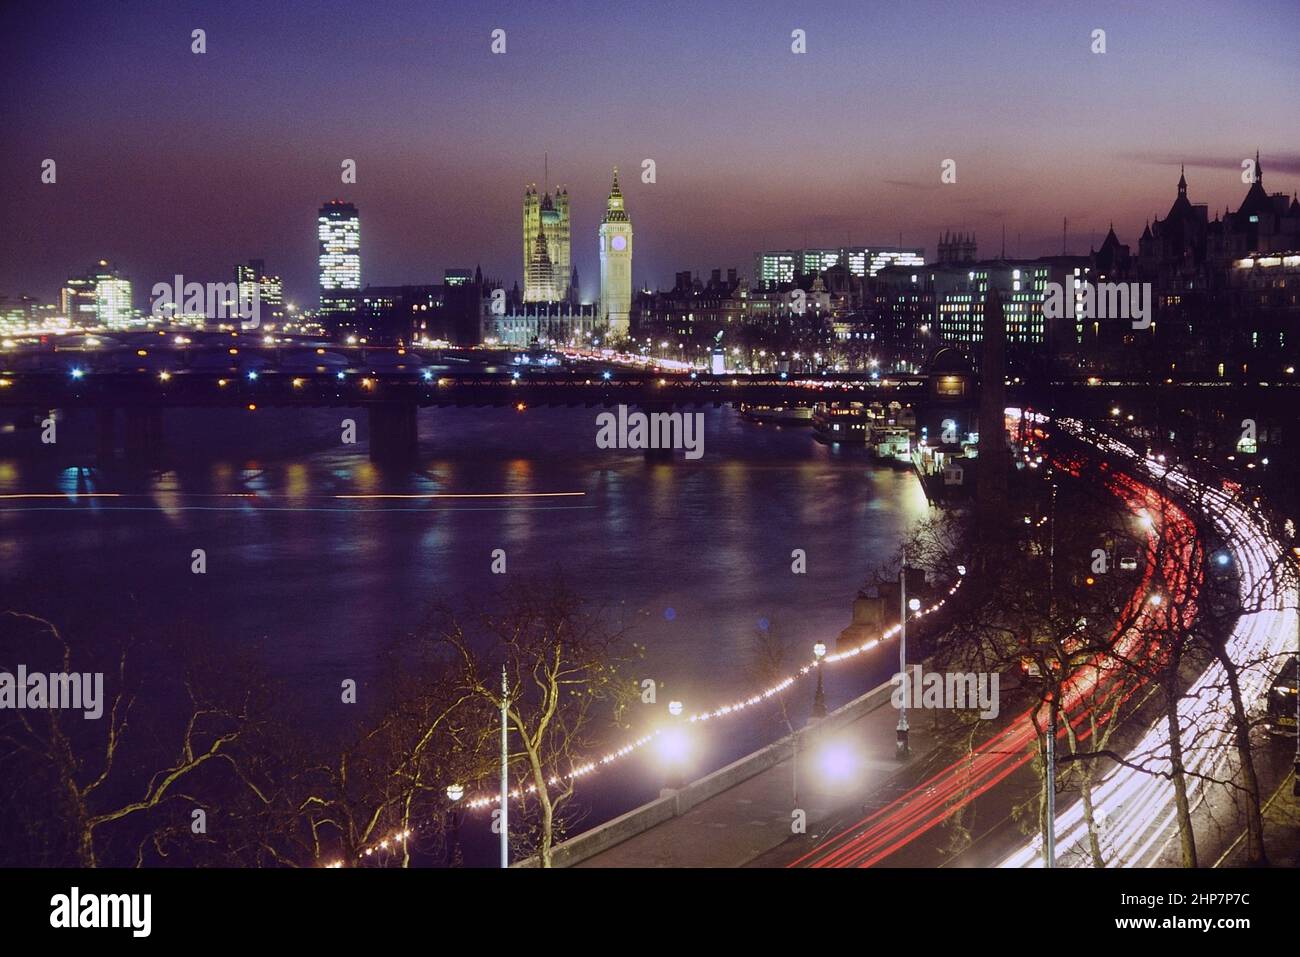 Elevated view of The Houses of Parliament and Victoria Embankment at night, London, England, UK. Circa 1980's Stock Photo